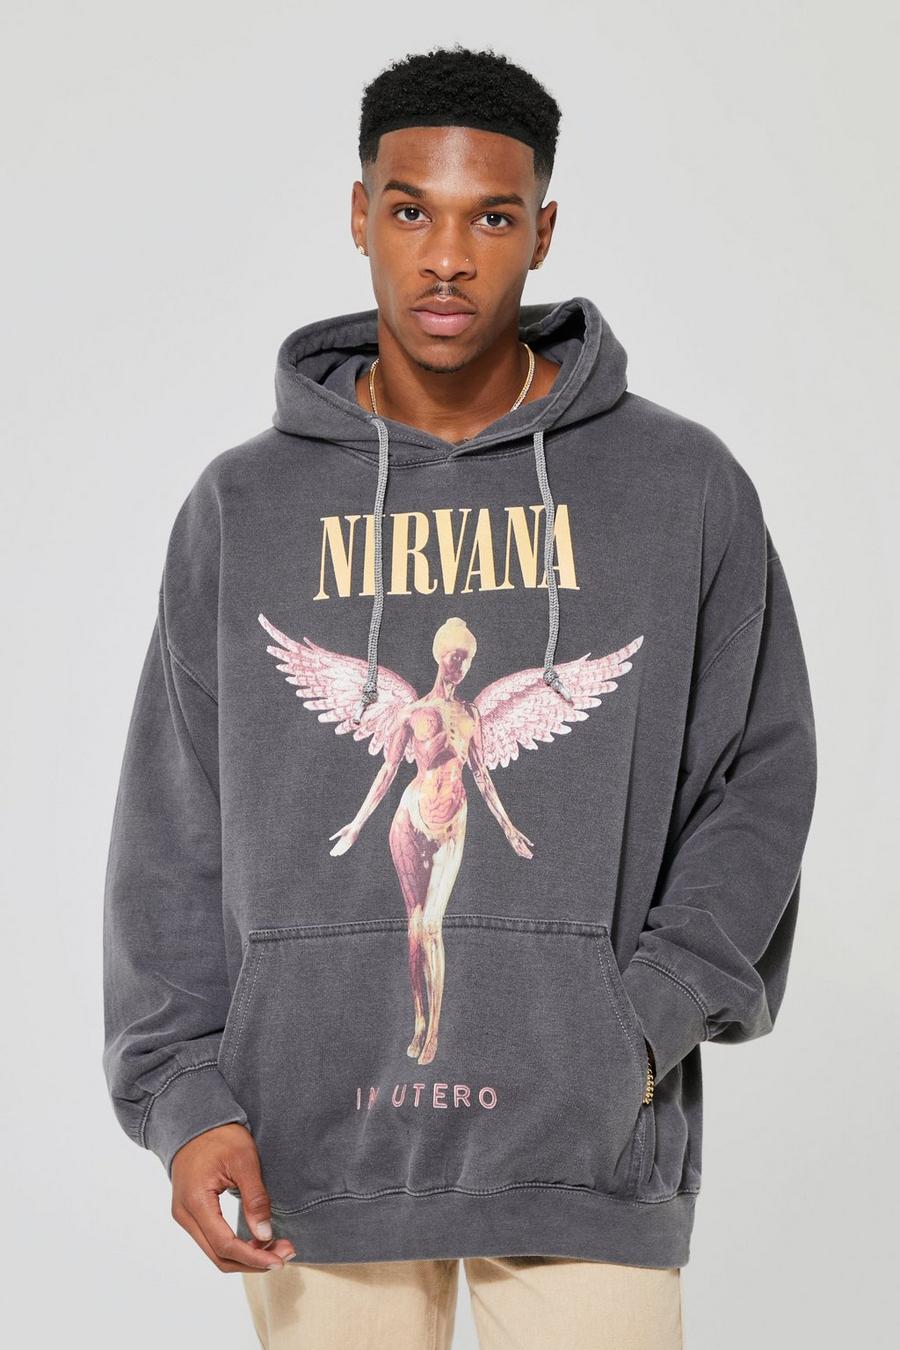 Charcoal grey Oversized Nirvana Washed License Hoodie